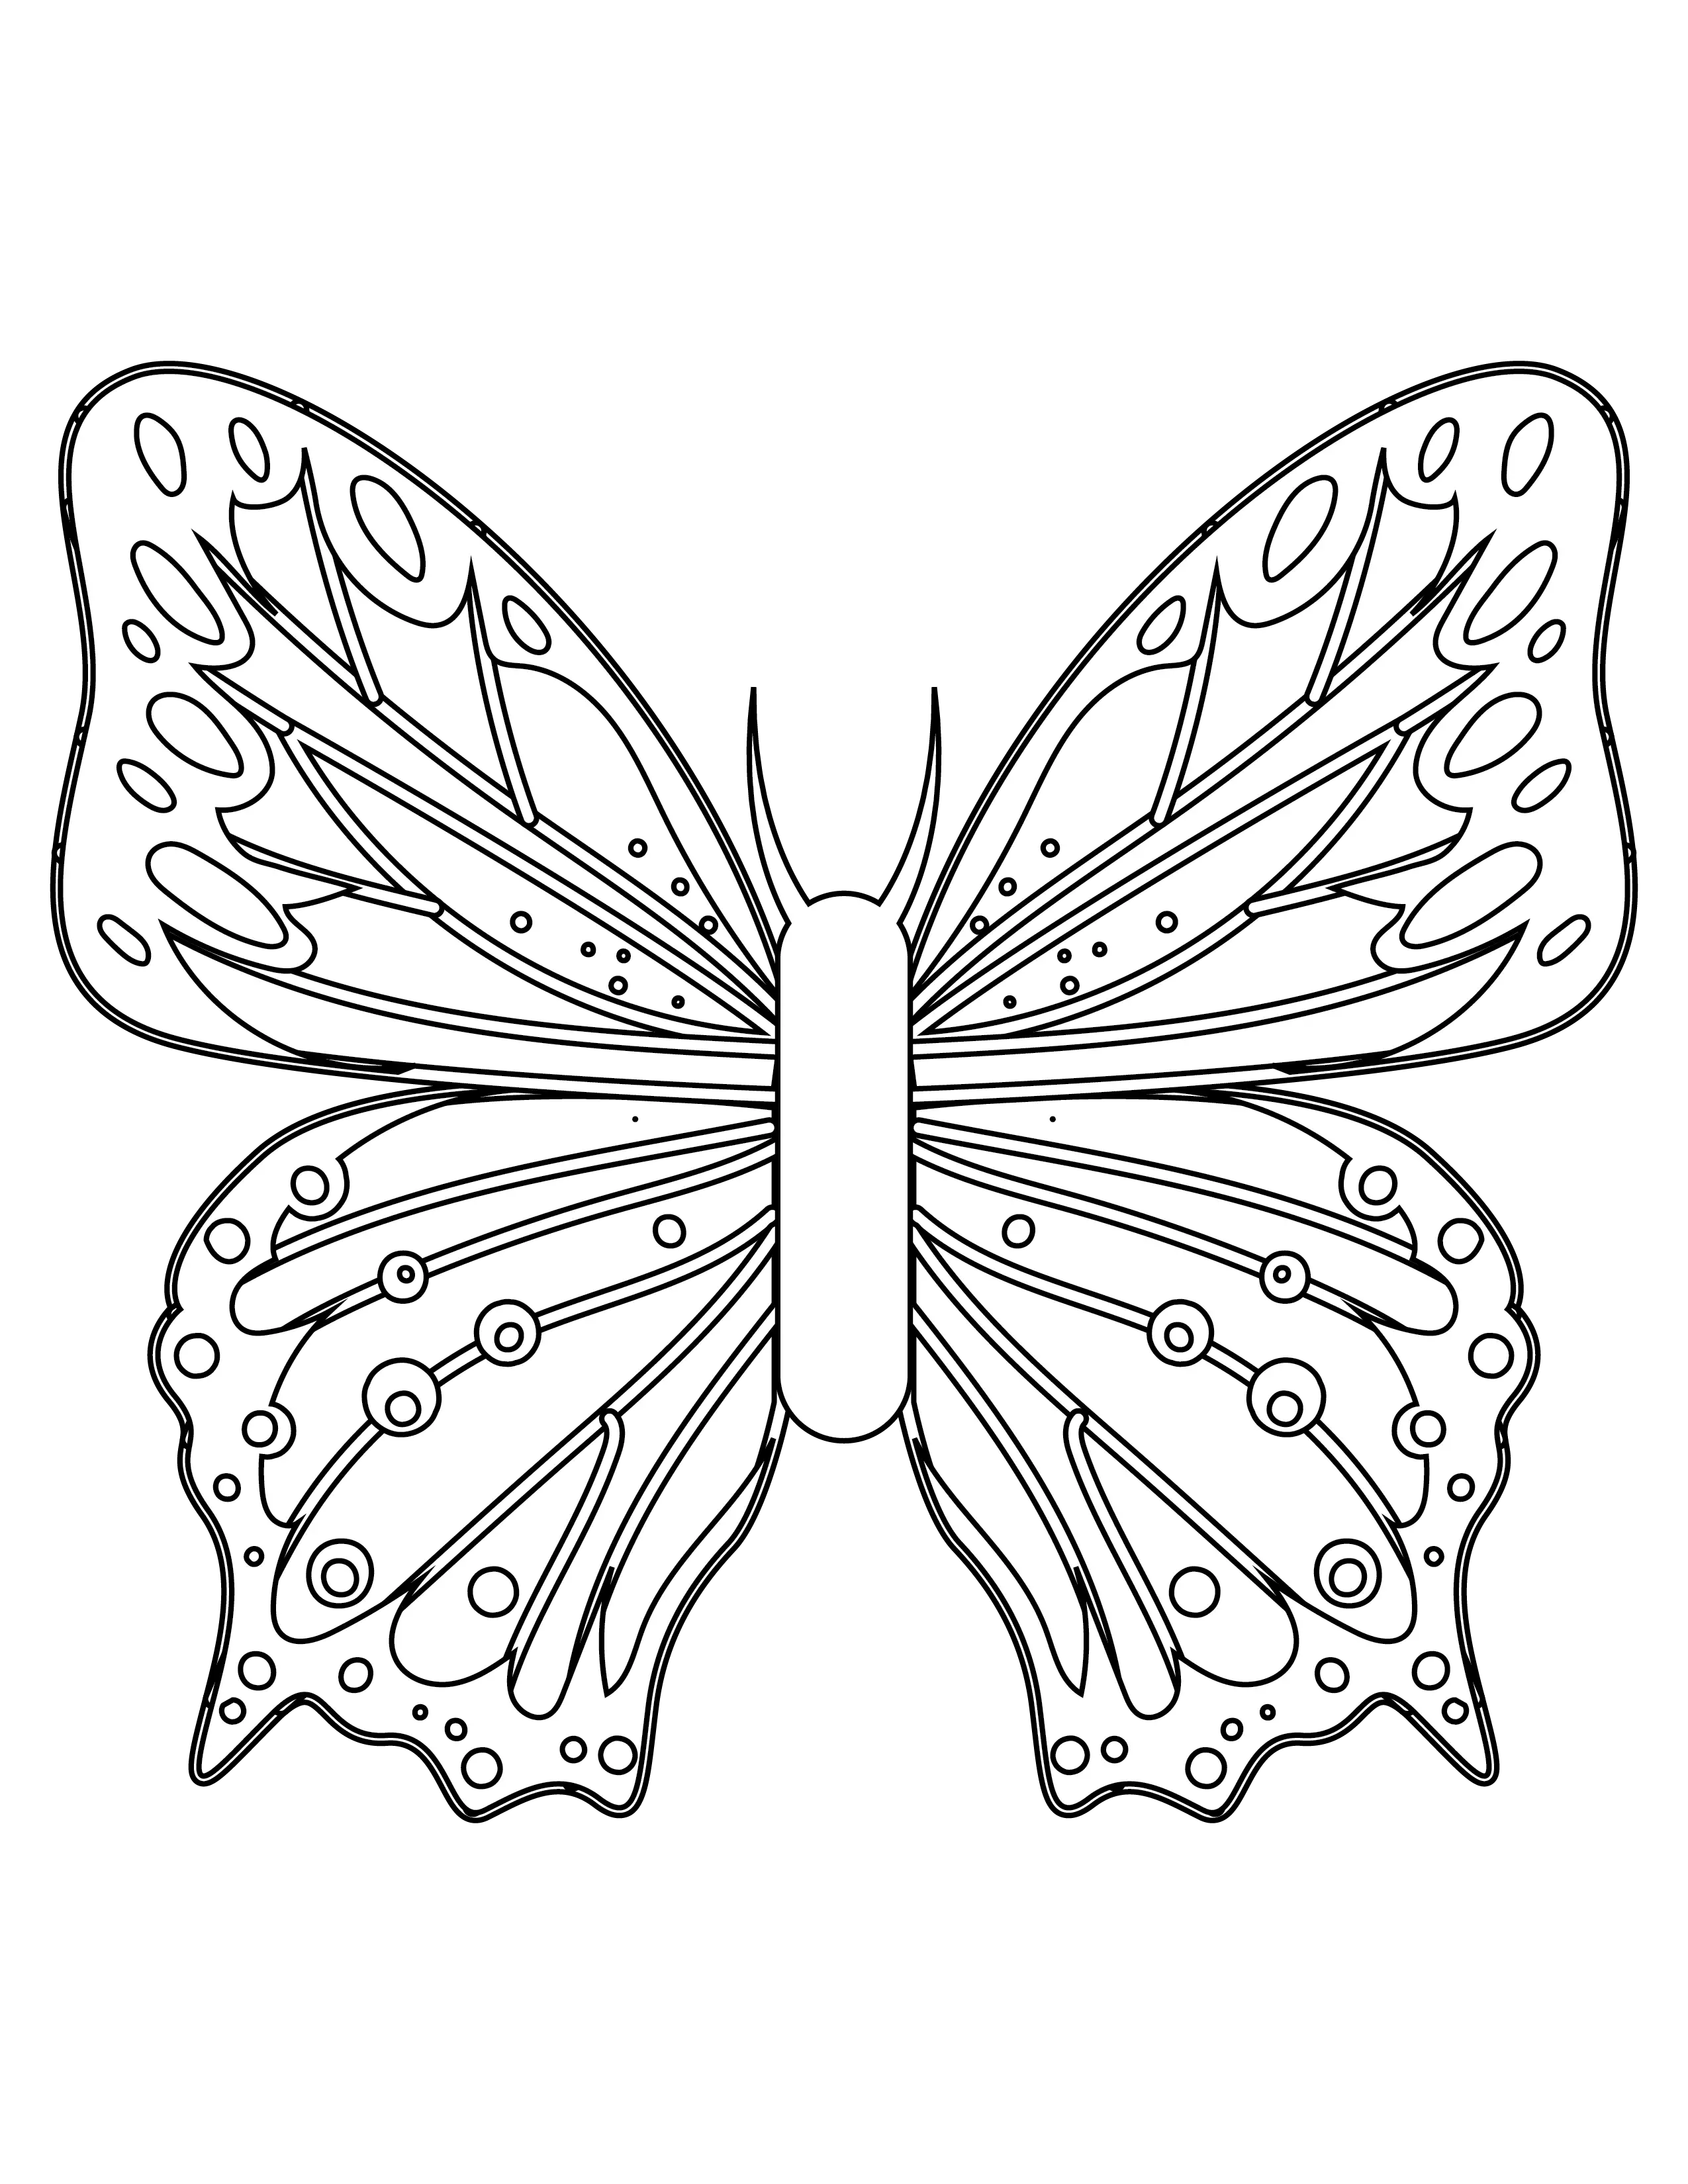 simple-butterfly-coloring-page-insect-for-kids-outline-doodle-illustration-printable